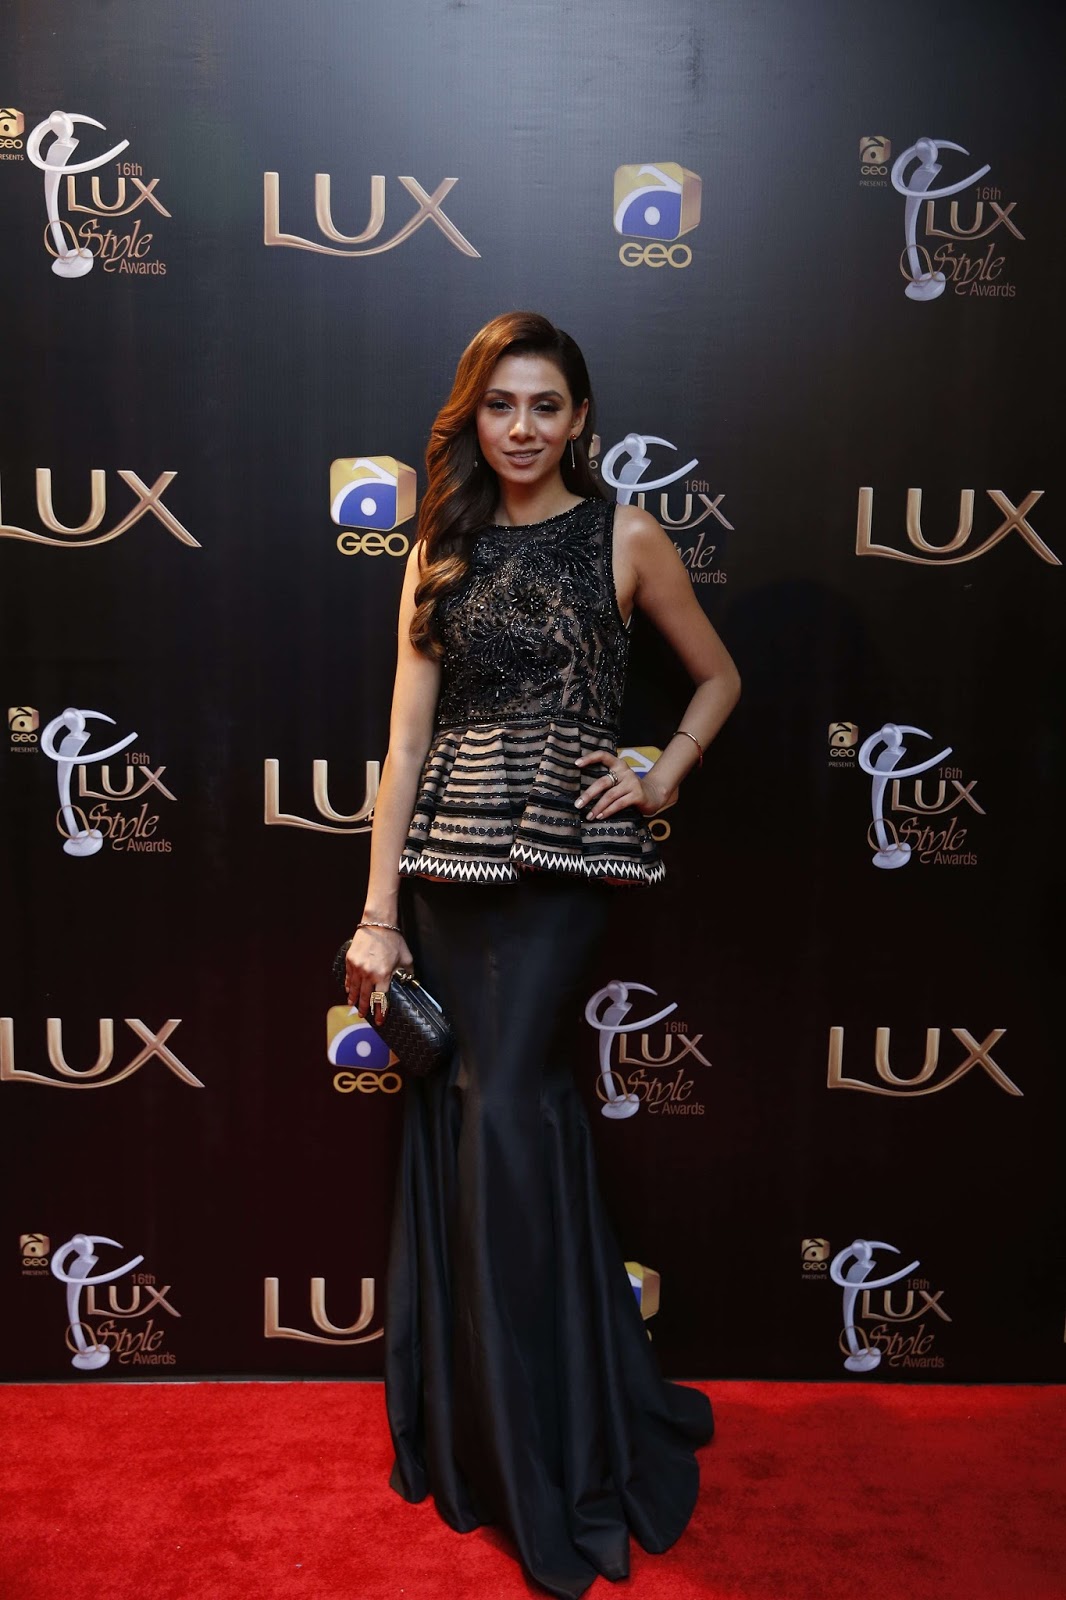 Super Hot Pakistani Divas At The 16th LUX Style Awards 2017